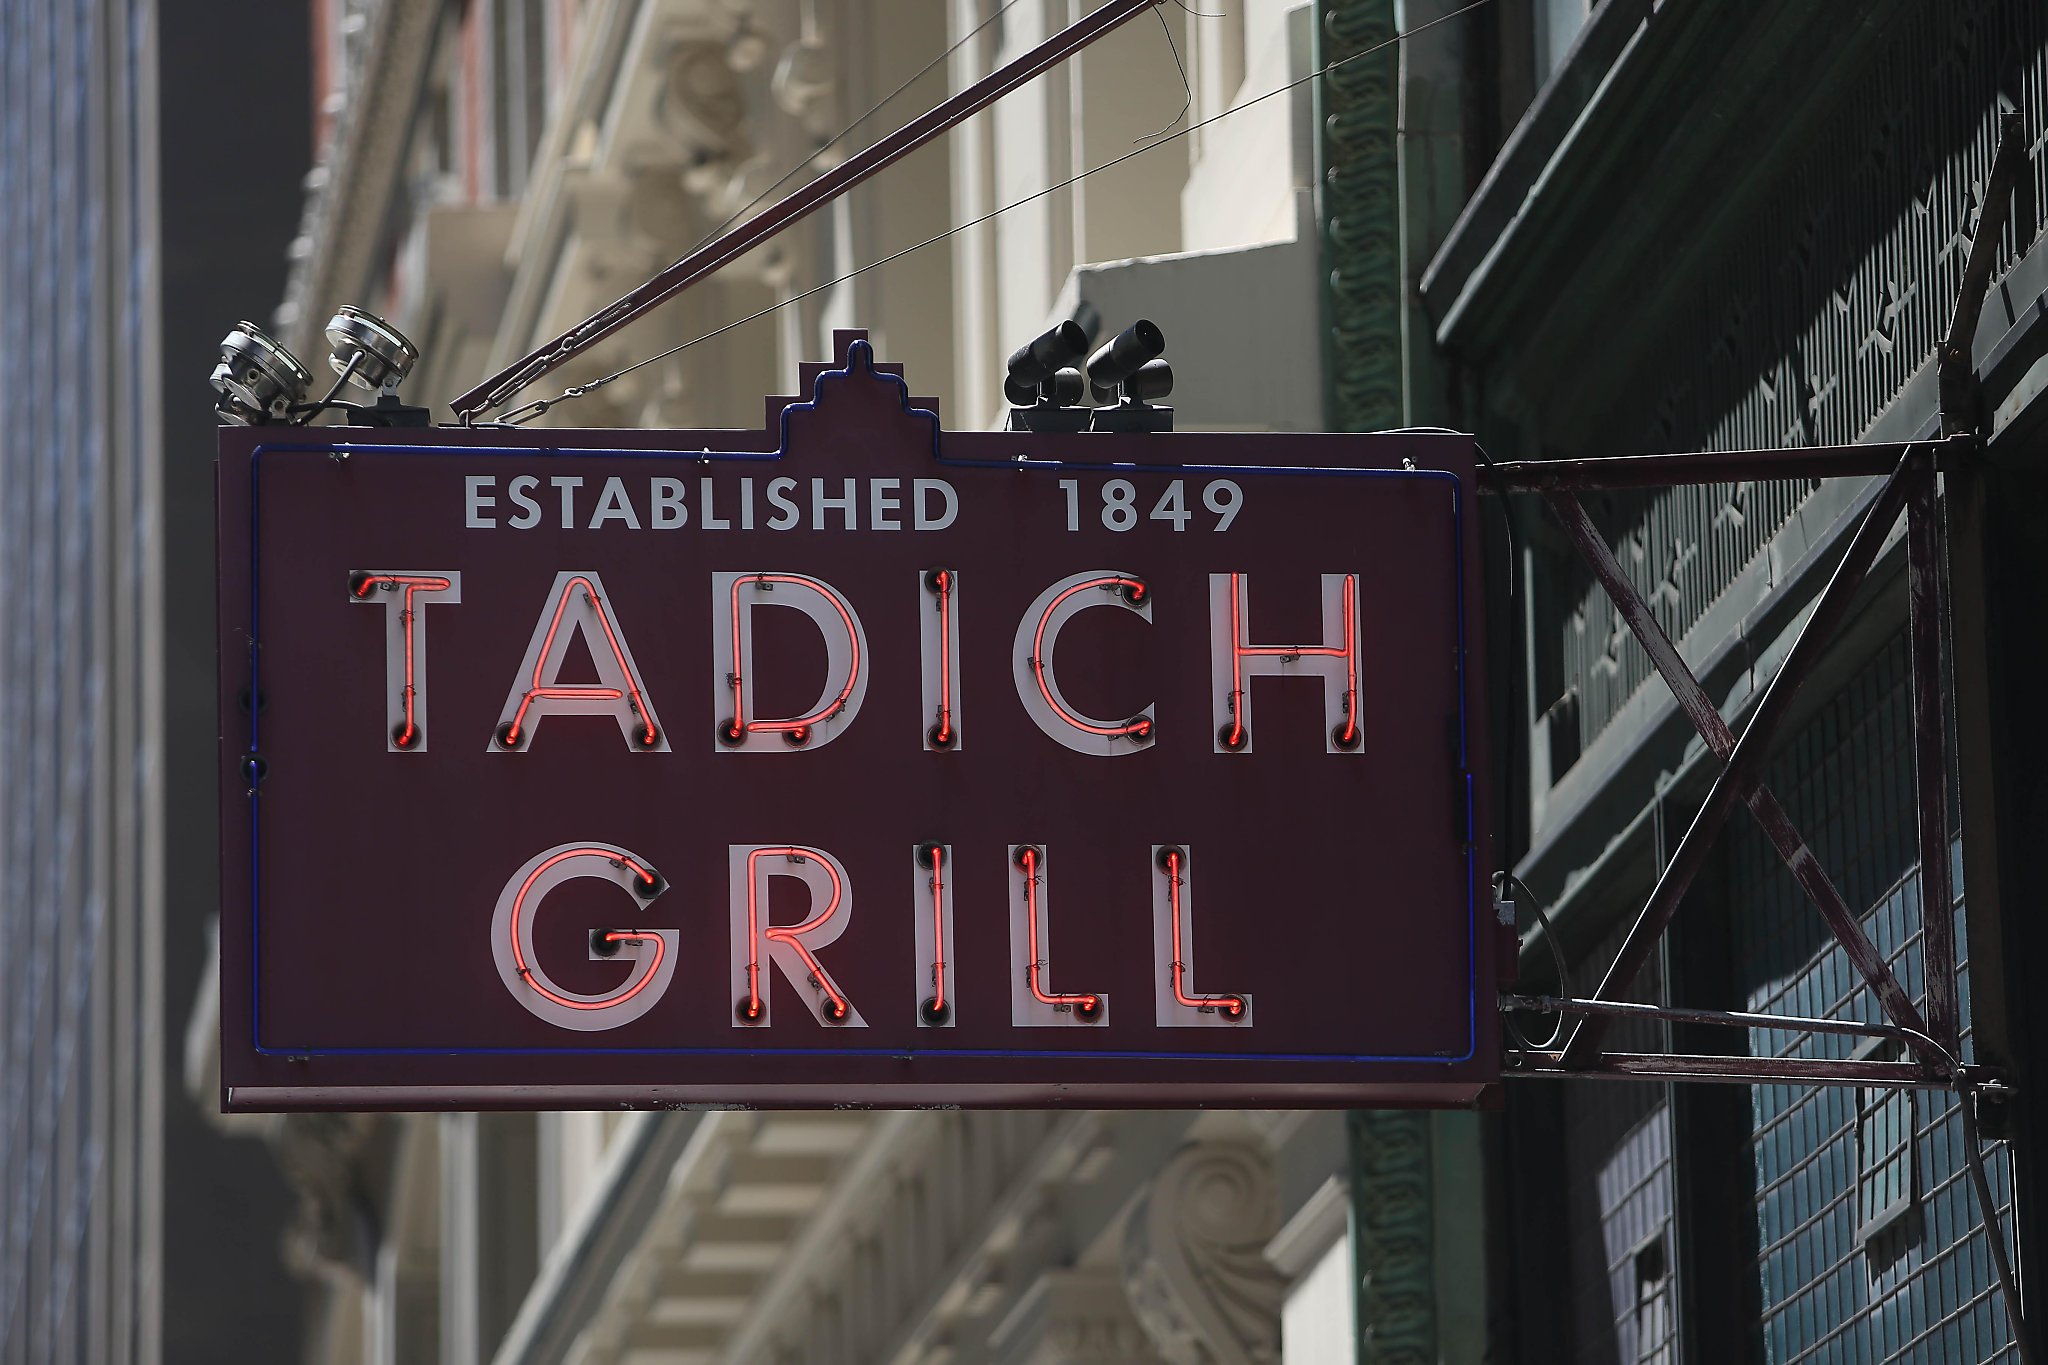 Historic Tadich Grill in SF gets ‘lifeline’ of new funding from controversial Barstool Sports